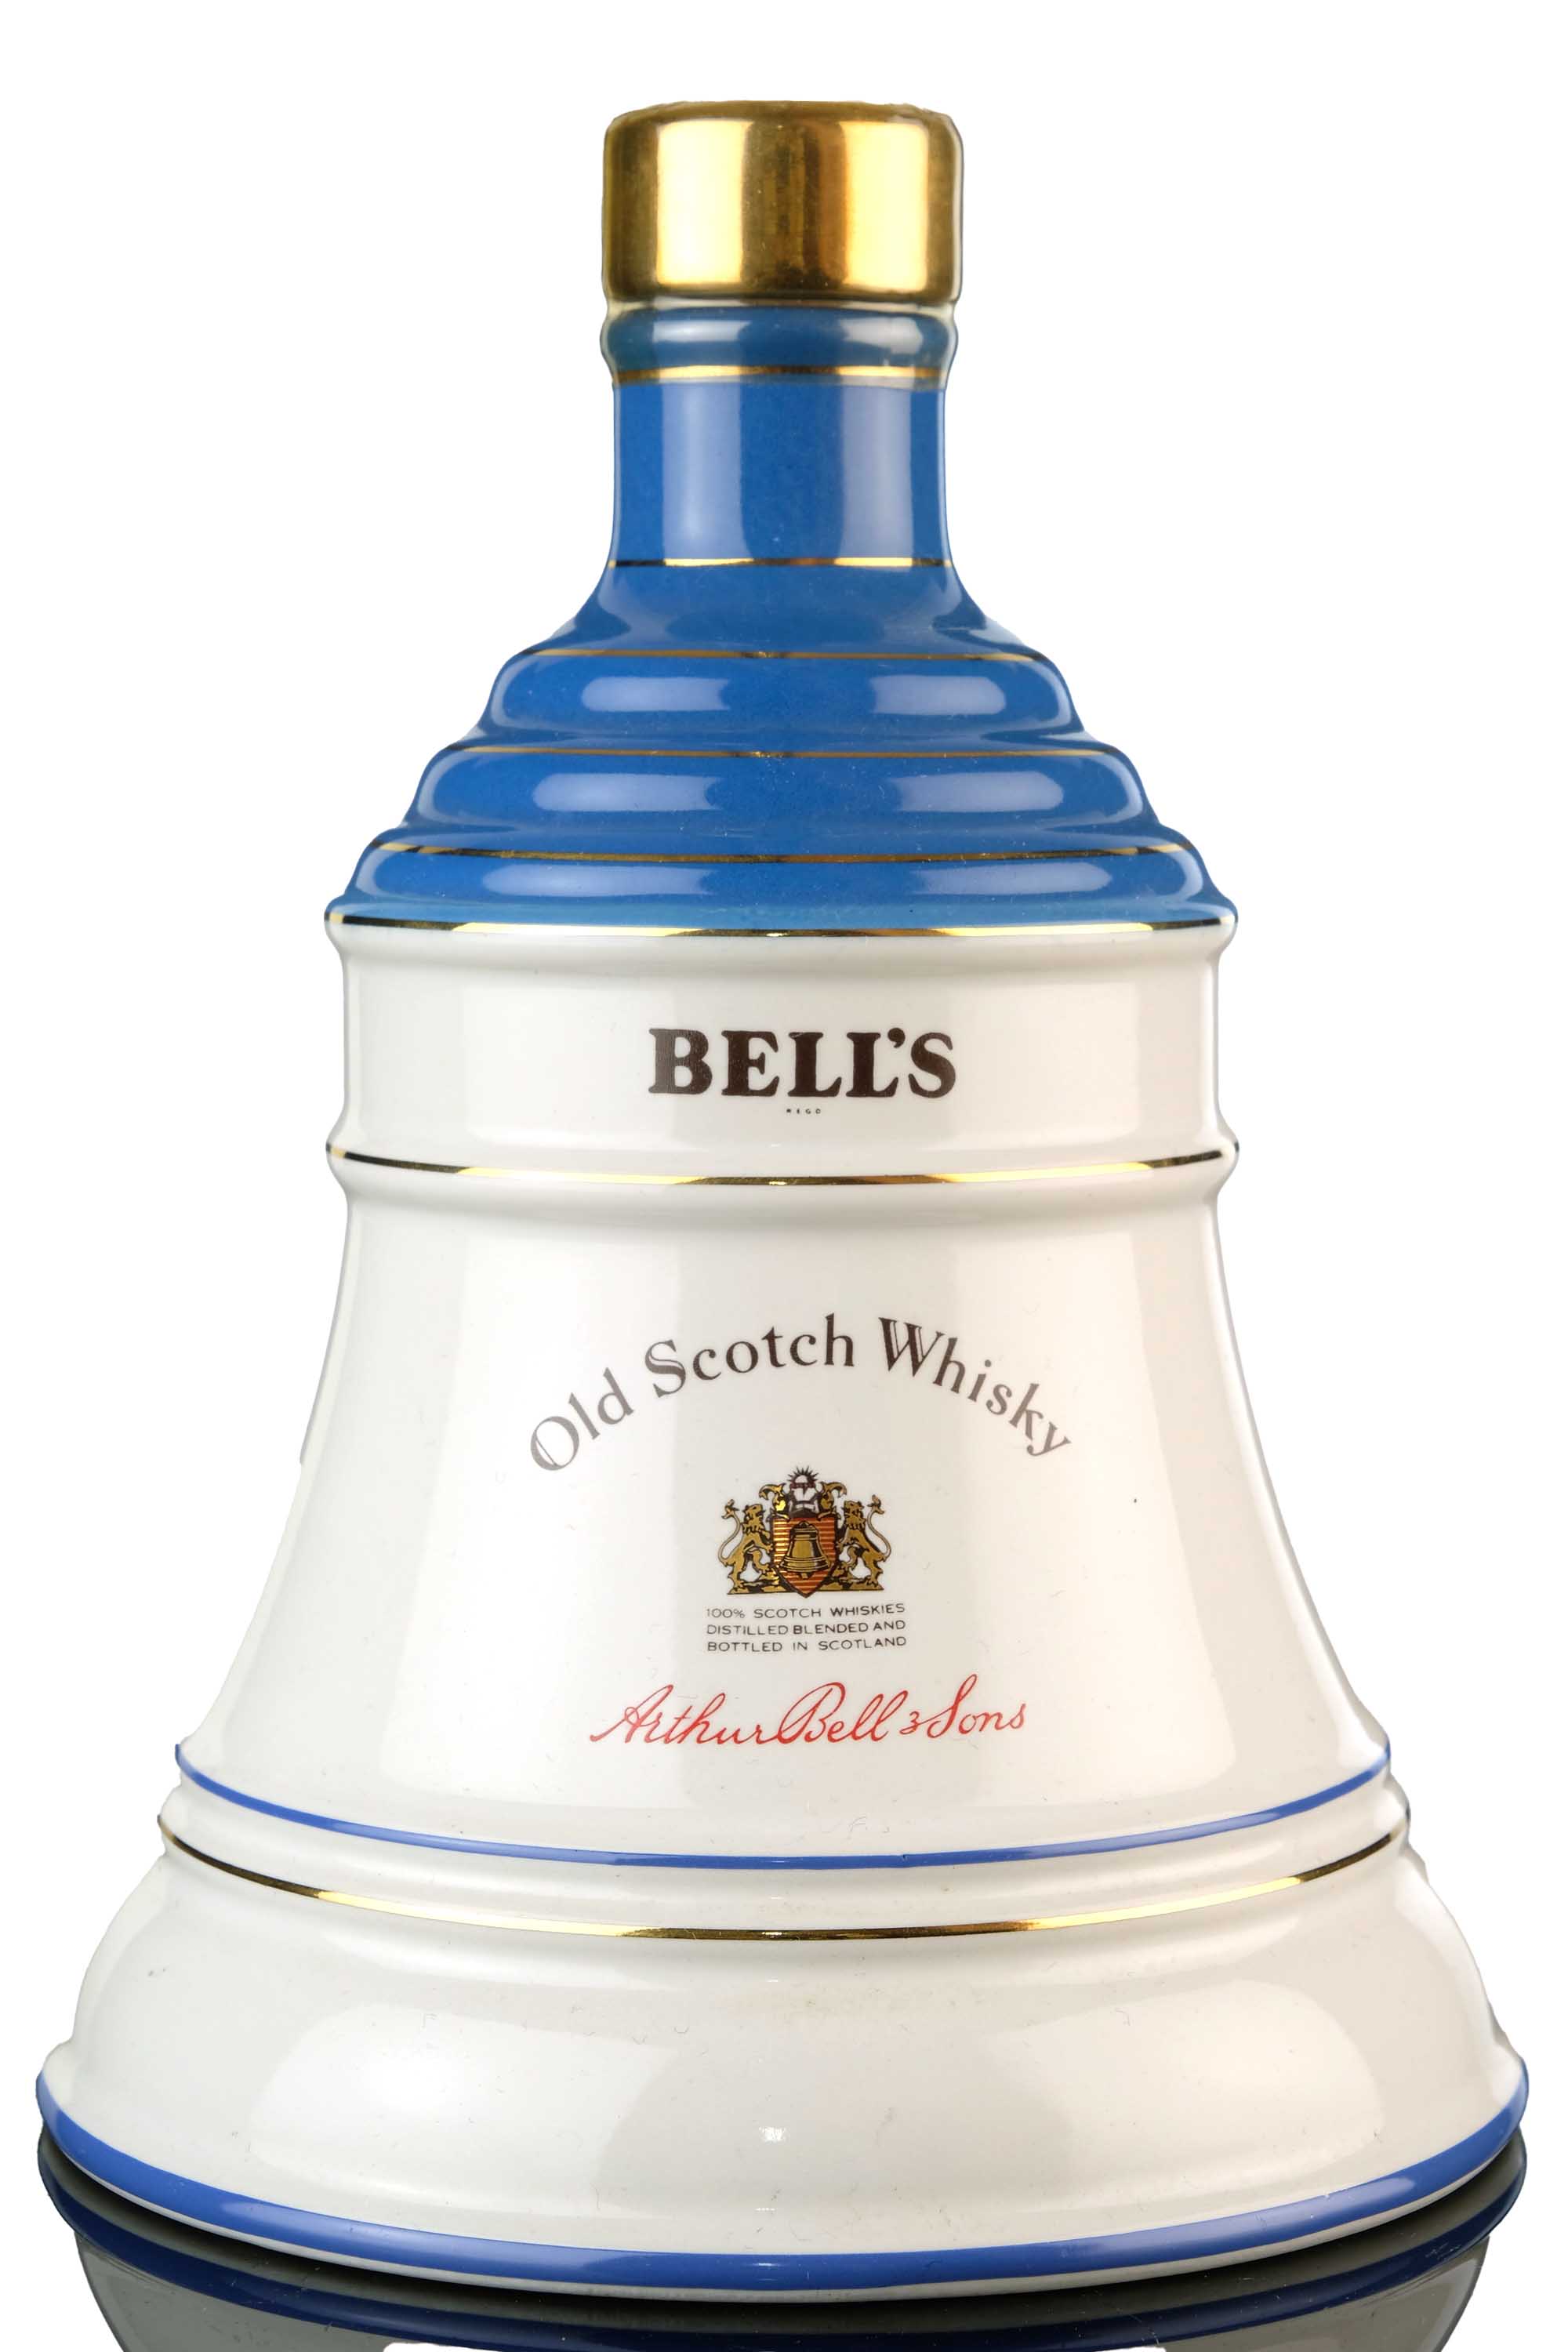 Bells To Celebrate The 100th Birthday Of The Queen Mother